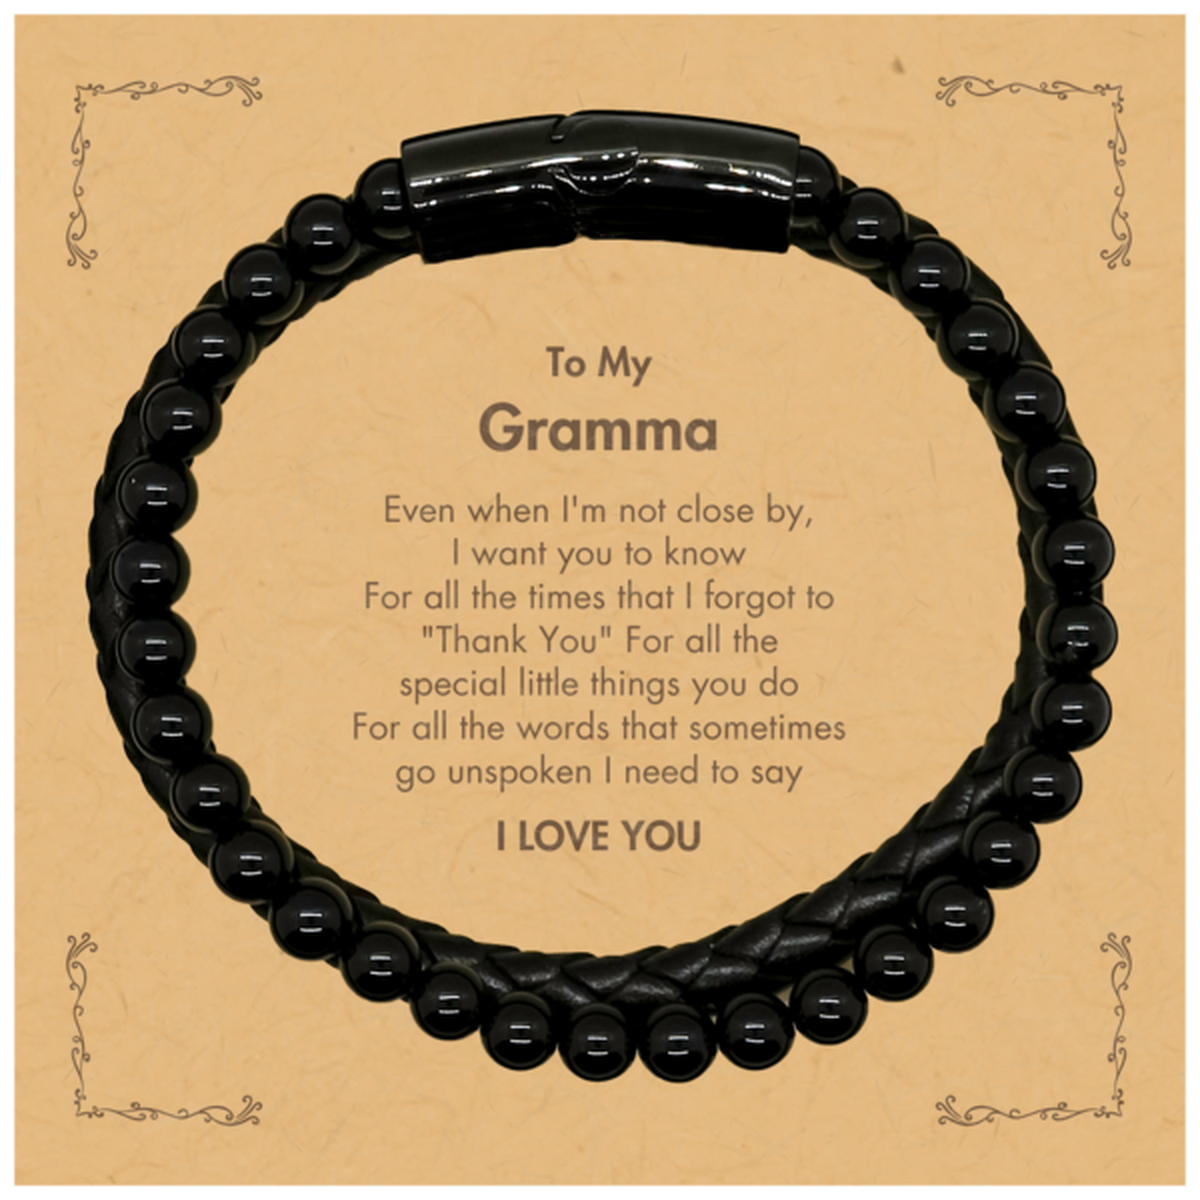 Thank You Gifts for Gramma, Keepsake Stone Leather Bracelets Gifts for Gramma Birthday Mother's day Father's Day Gramma For all the words That sometimes go unspoken I need to say I LOVE YOU